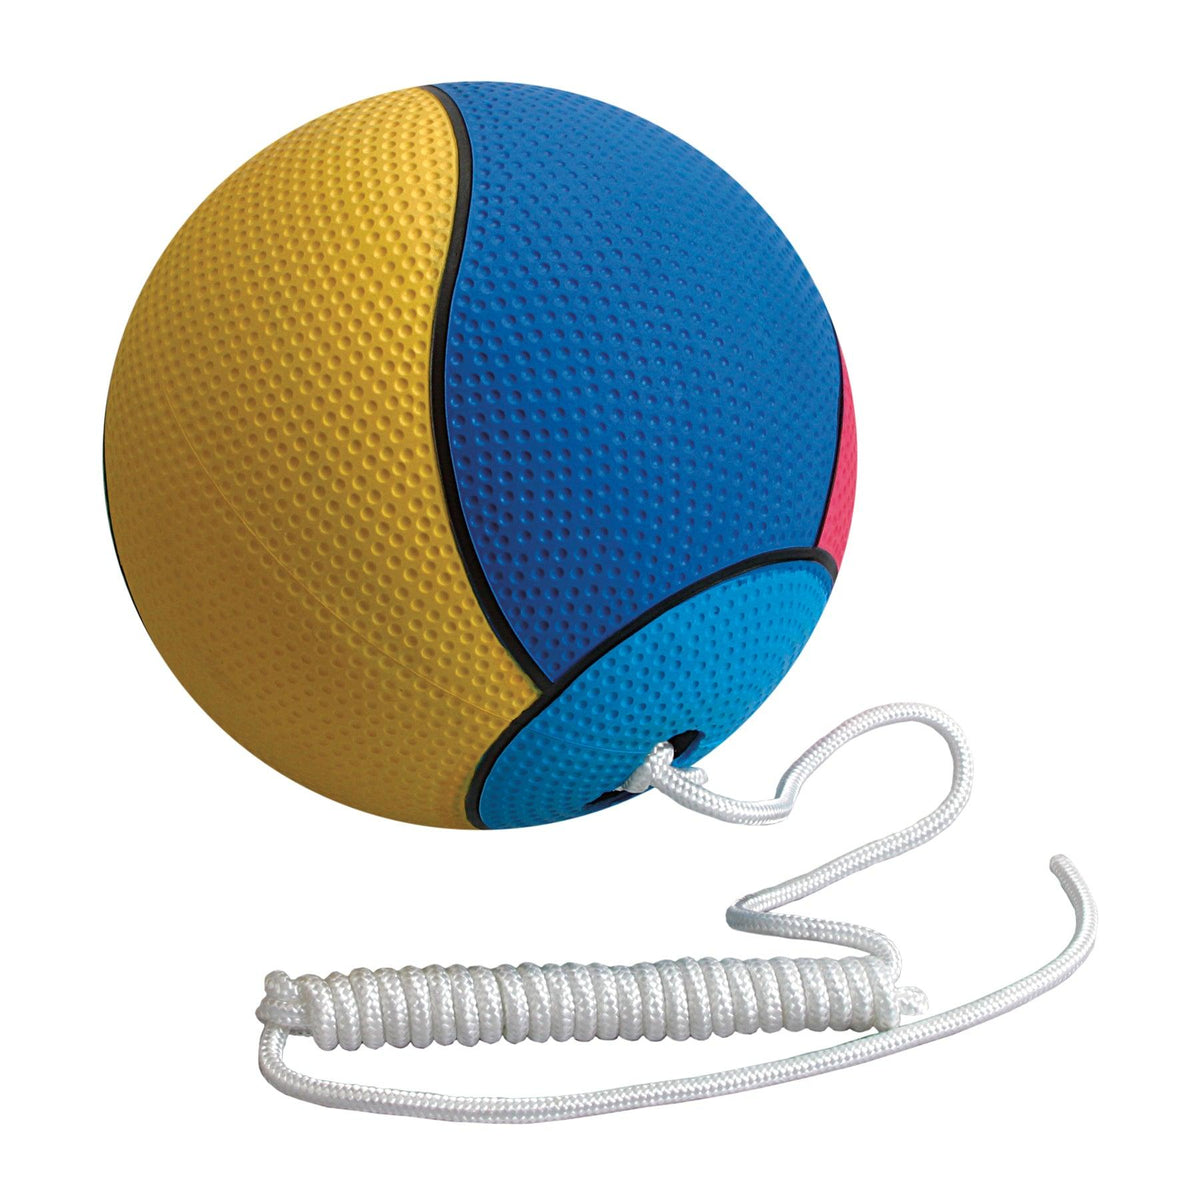 CELLULAR TETHERBALL DIMPLED - Marcotte Sports Inc